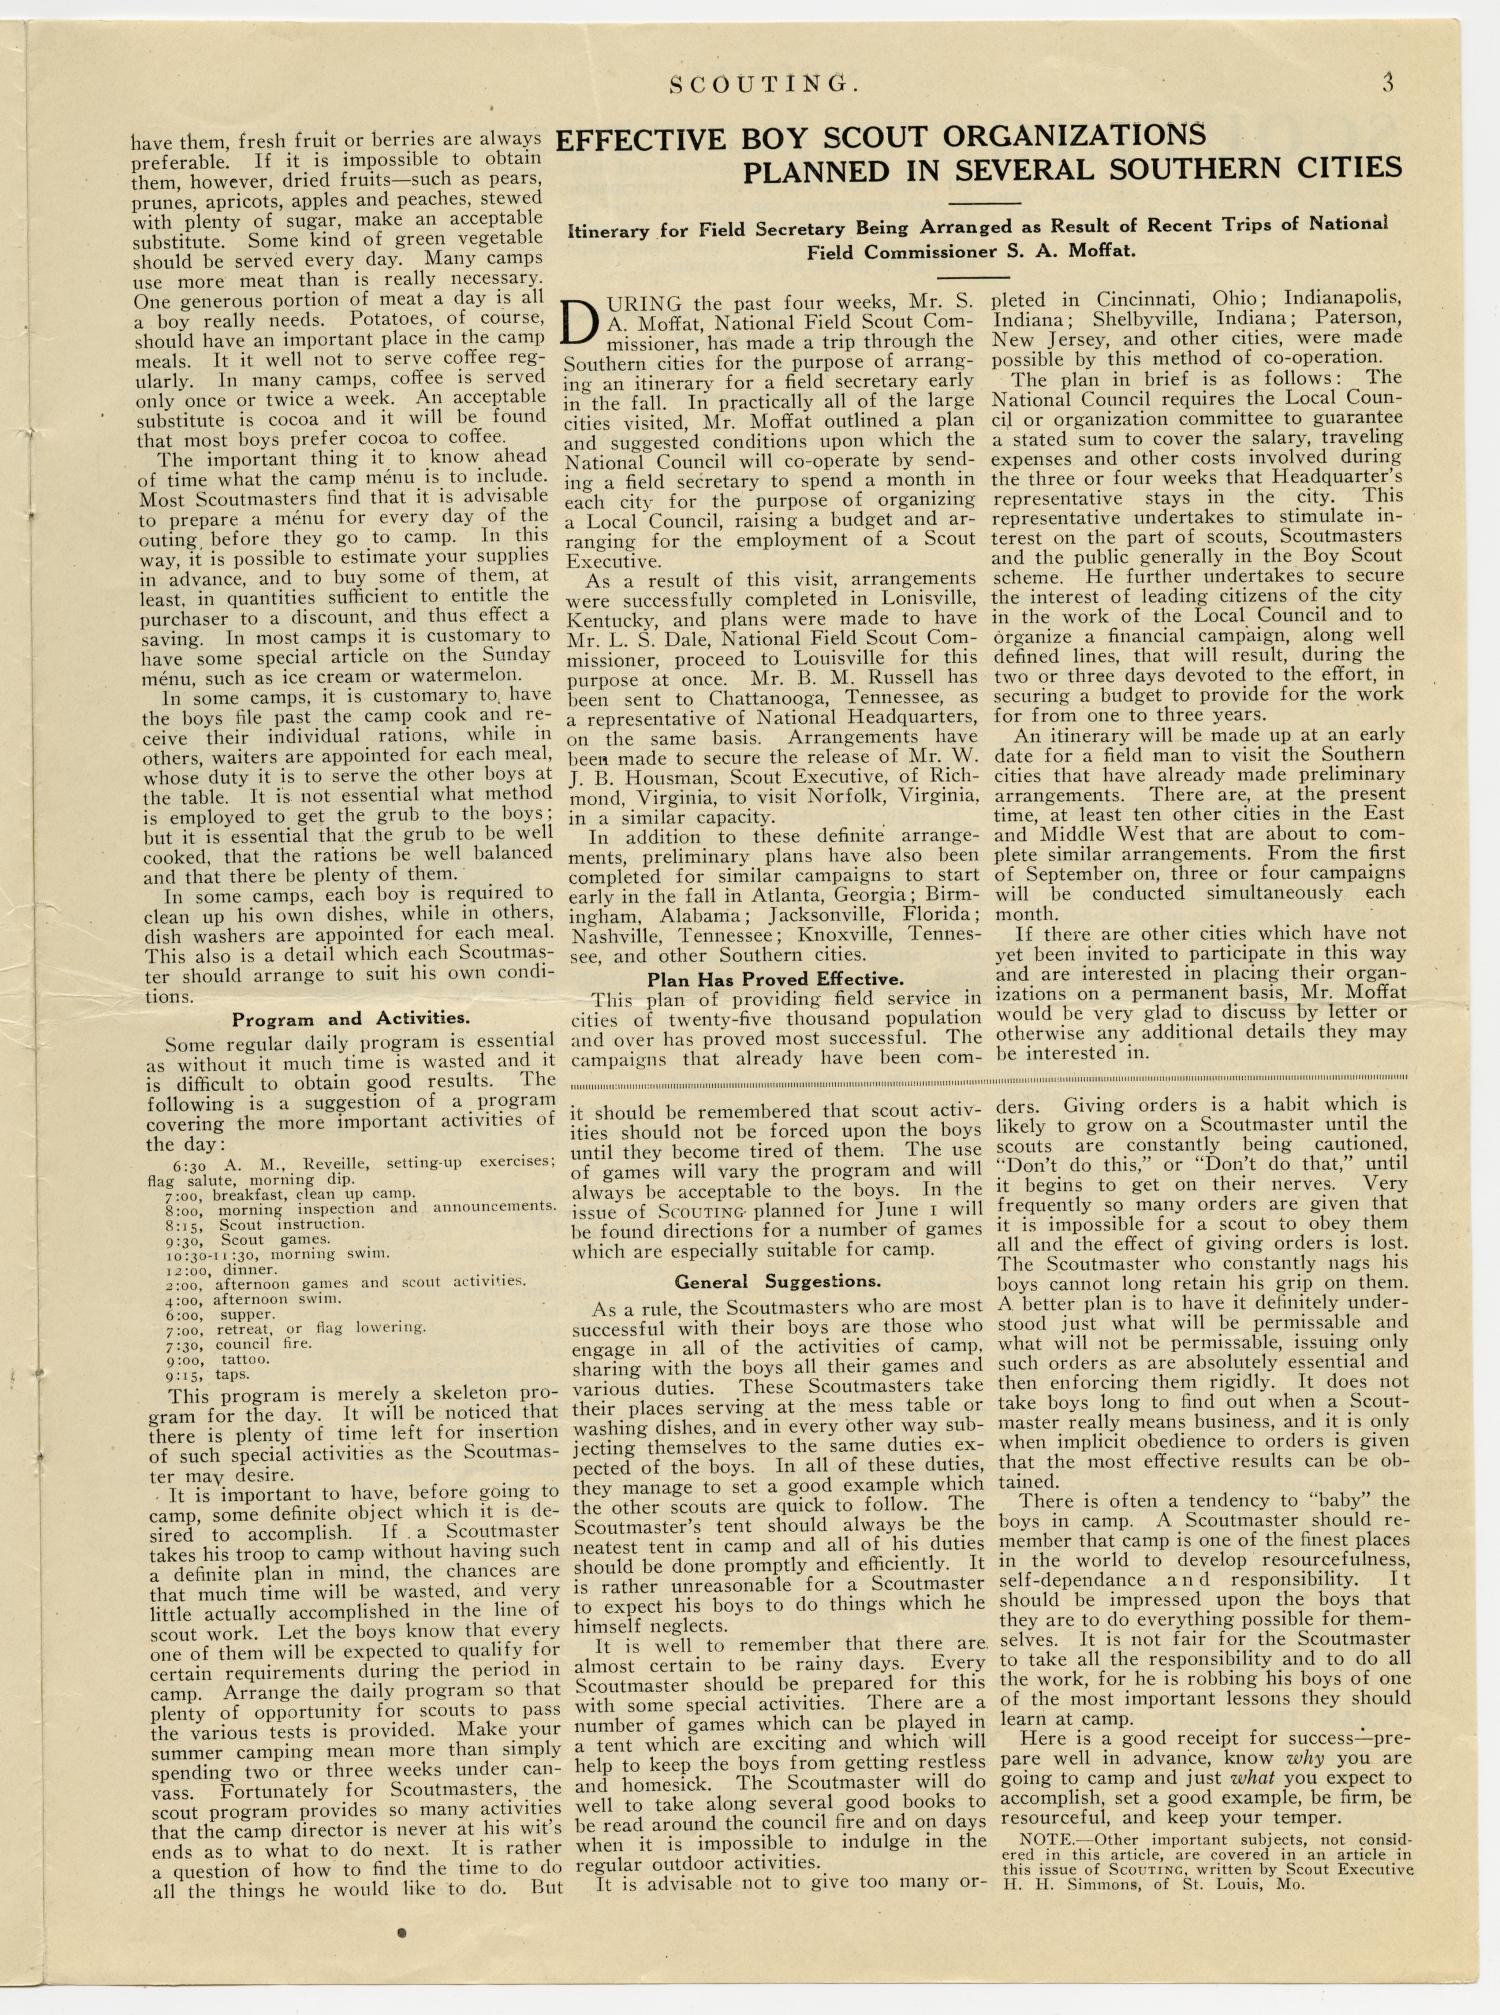 Scouting, Volume 3, Number 2, May 15, 1915
                                                
                                                    3
                                                